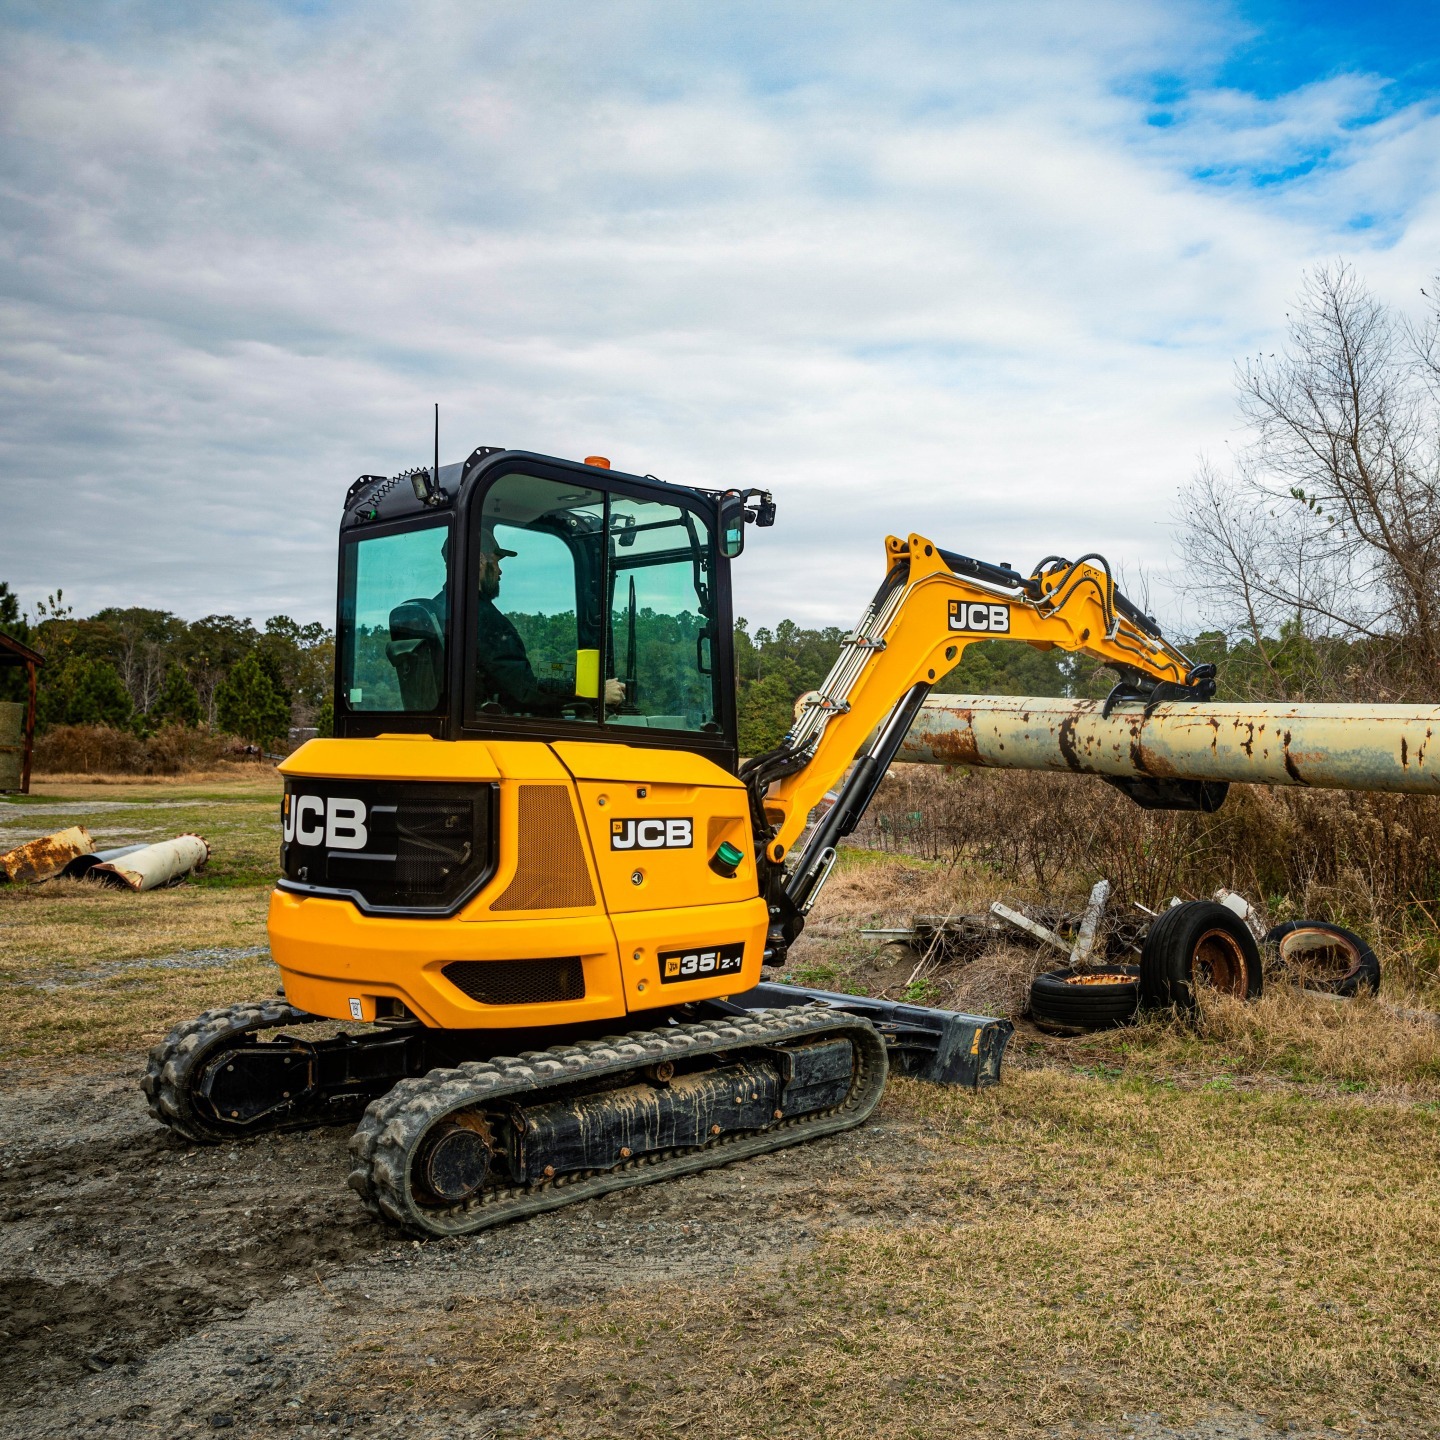 𝗧𝗮𝗸𝗲 𝗙𝗶𝘃𝗲 with one of the following two packages when you purchase a new JCB compact excavator: 

Option 1: 0% financing for up to 60 months (𝟱 years) 

Or 

Option 2:  𝟱 year (3,000 hours) warranty coverage & a cash rebate of up to $7,500!

Terms and conditions apply. Get in touch with our team today to take advantage of this deal! 

williamsjcb.com/contact-us